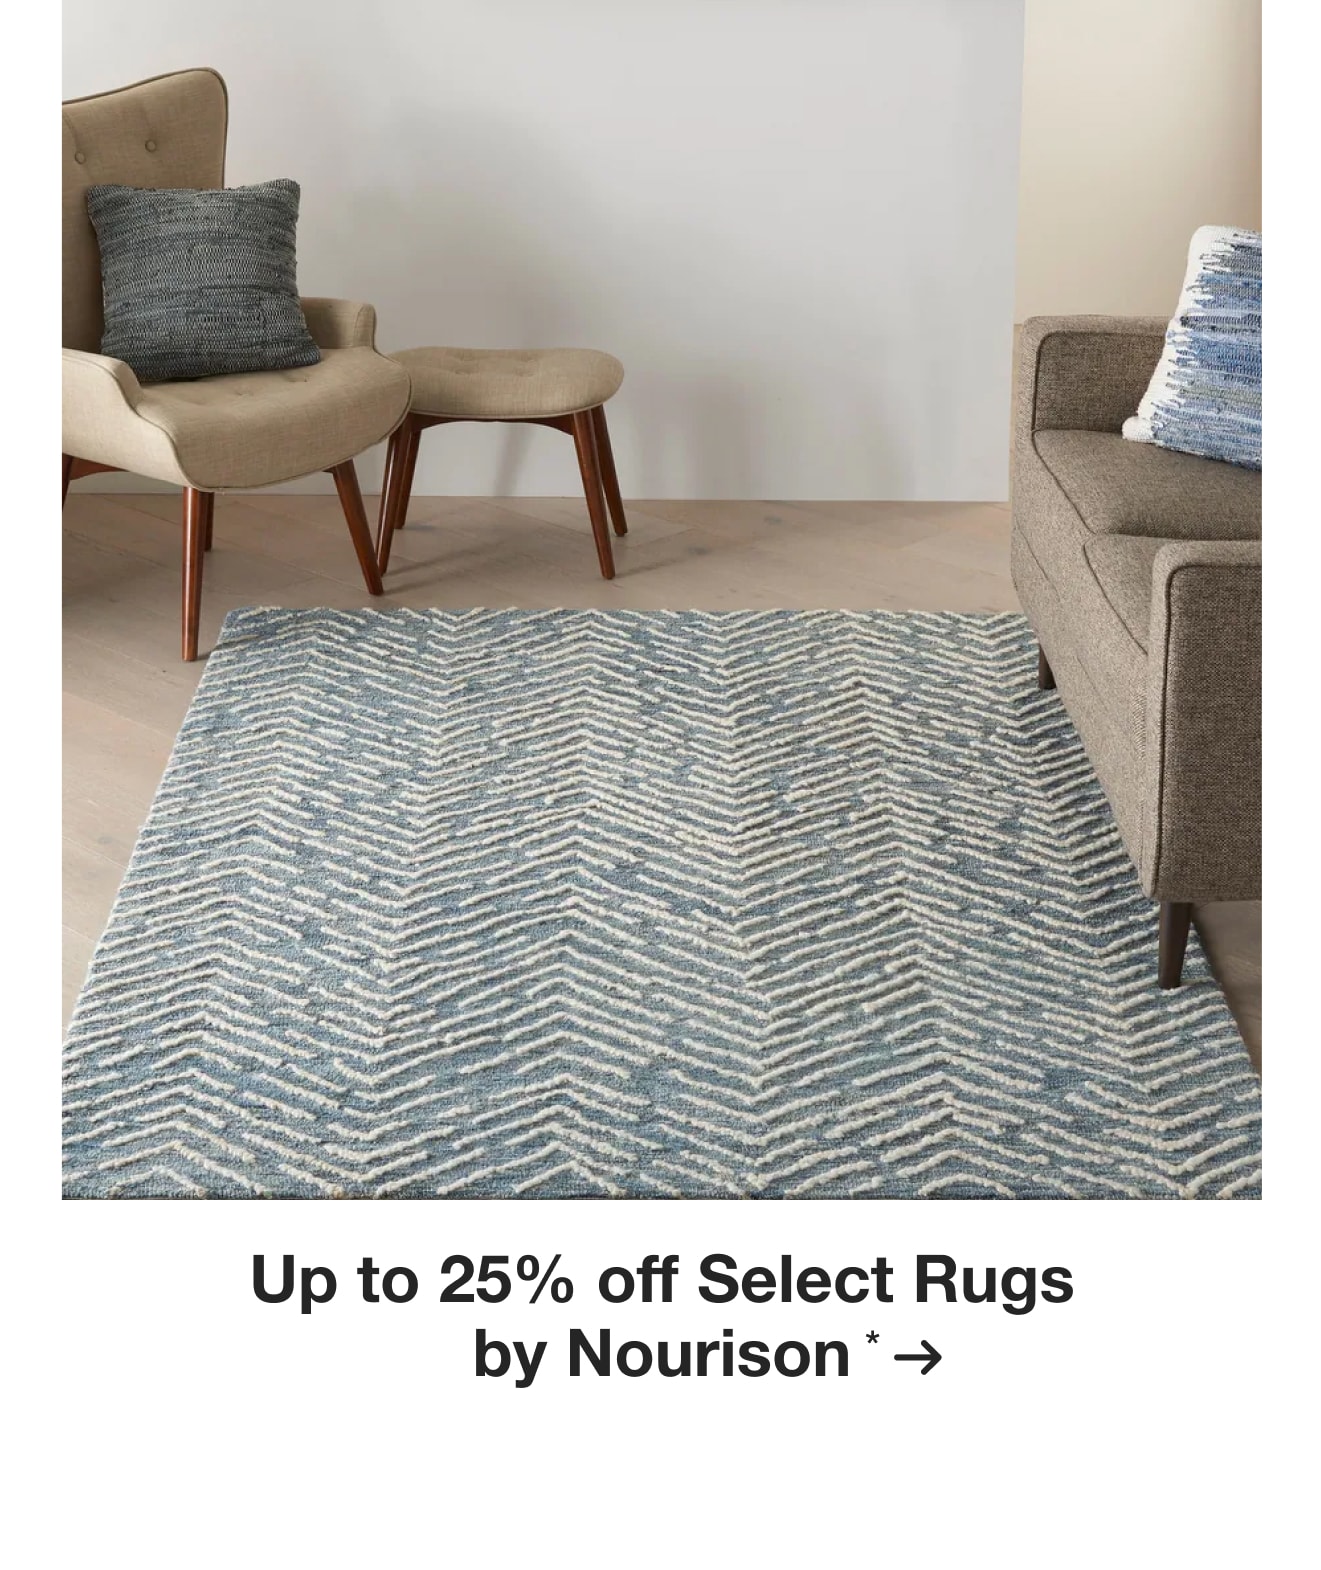 Up to 25% off Select Rugs by Nourison*